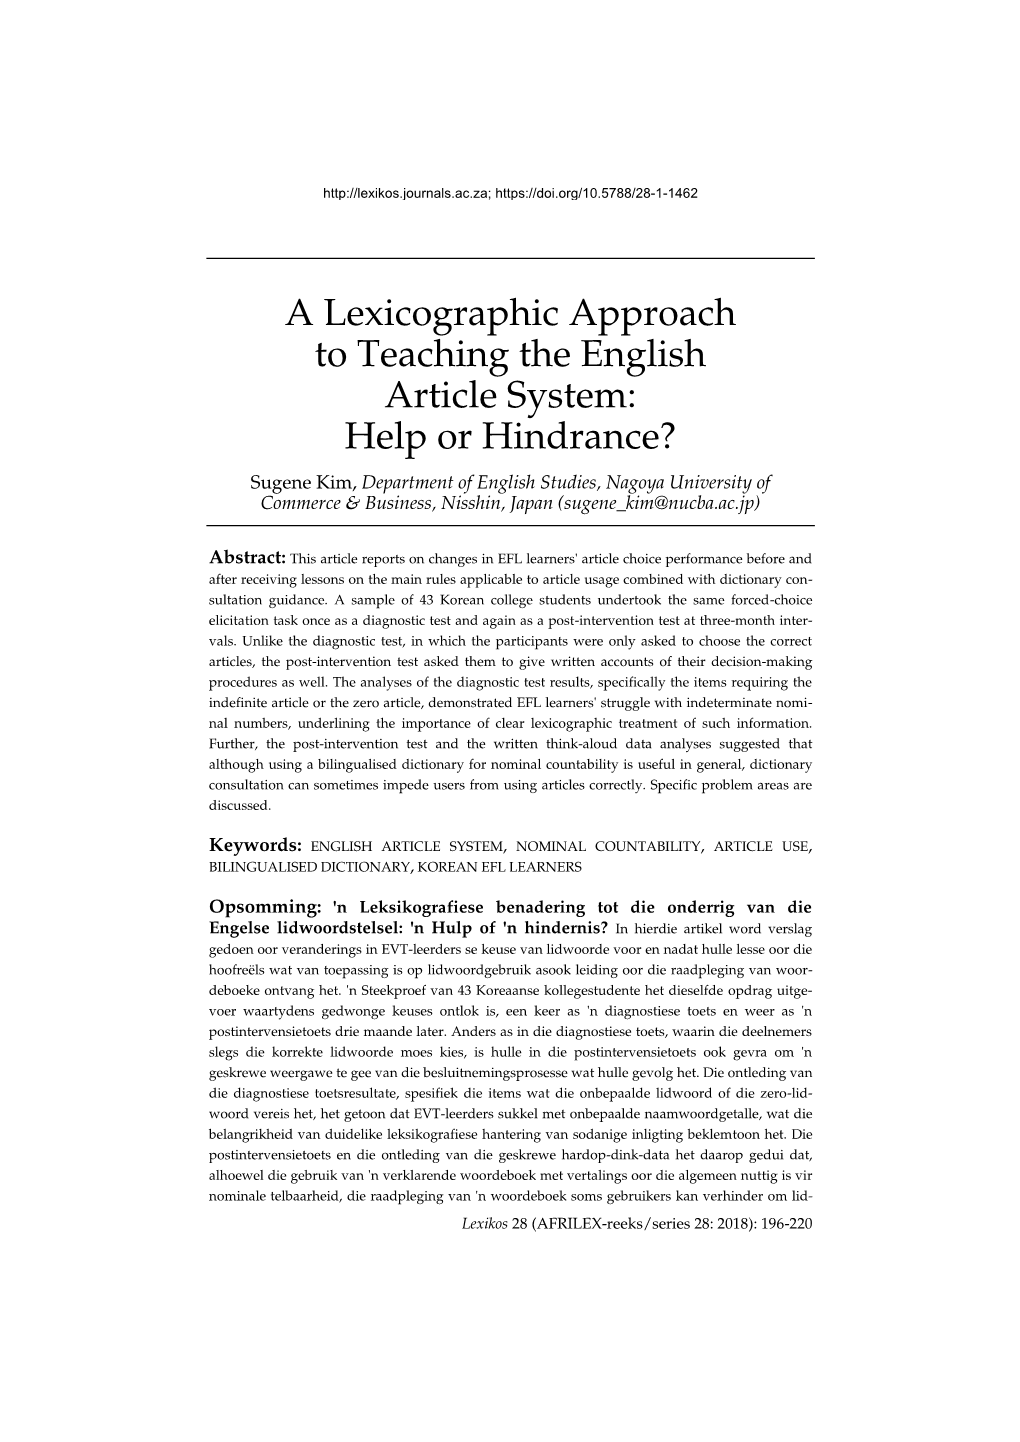 A Lexicographic Approach to Teaching the English Article System